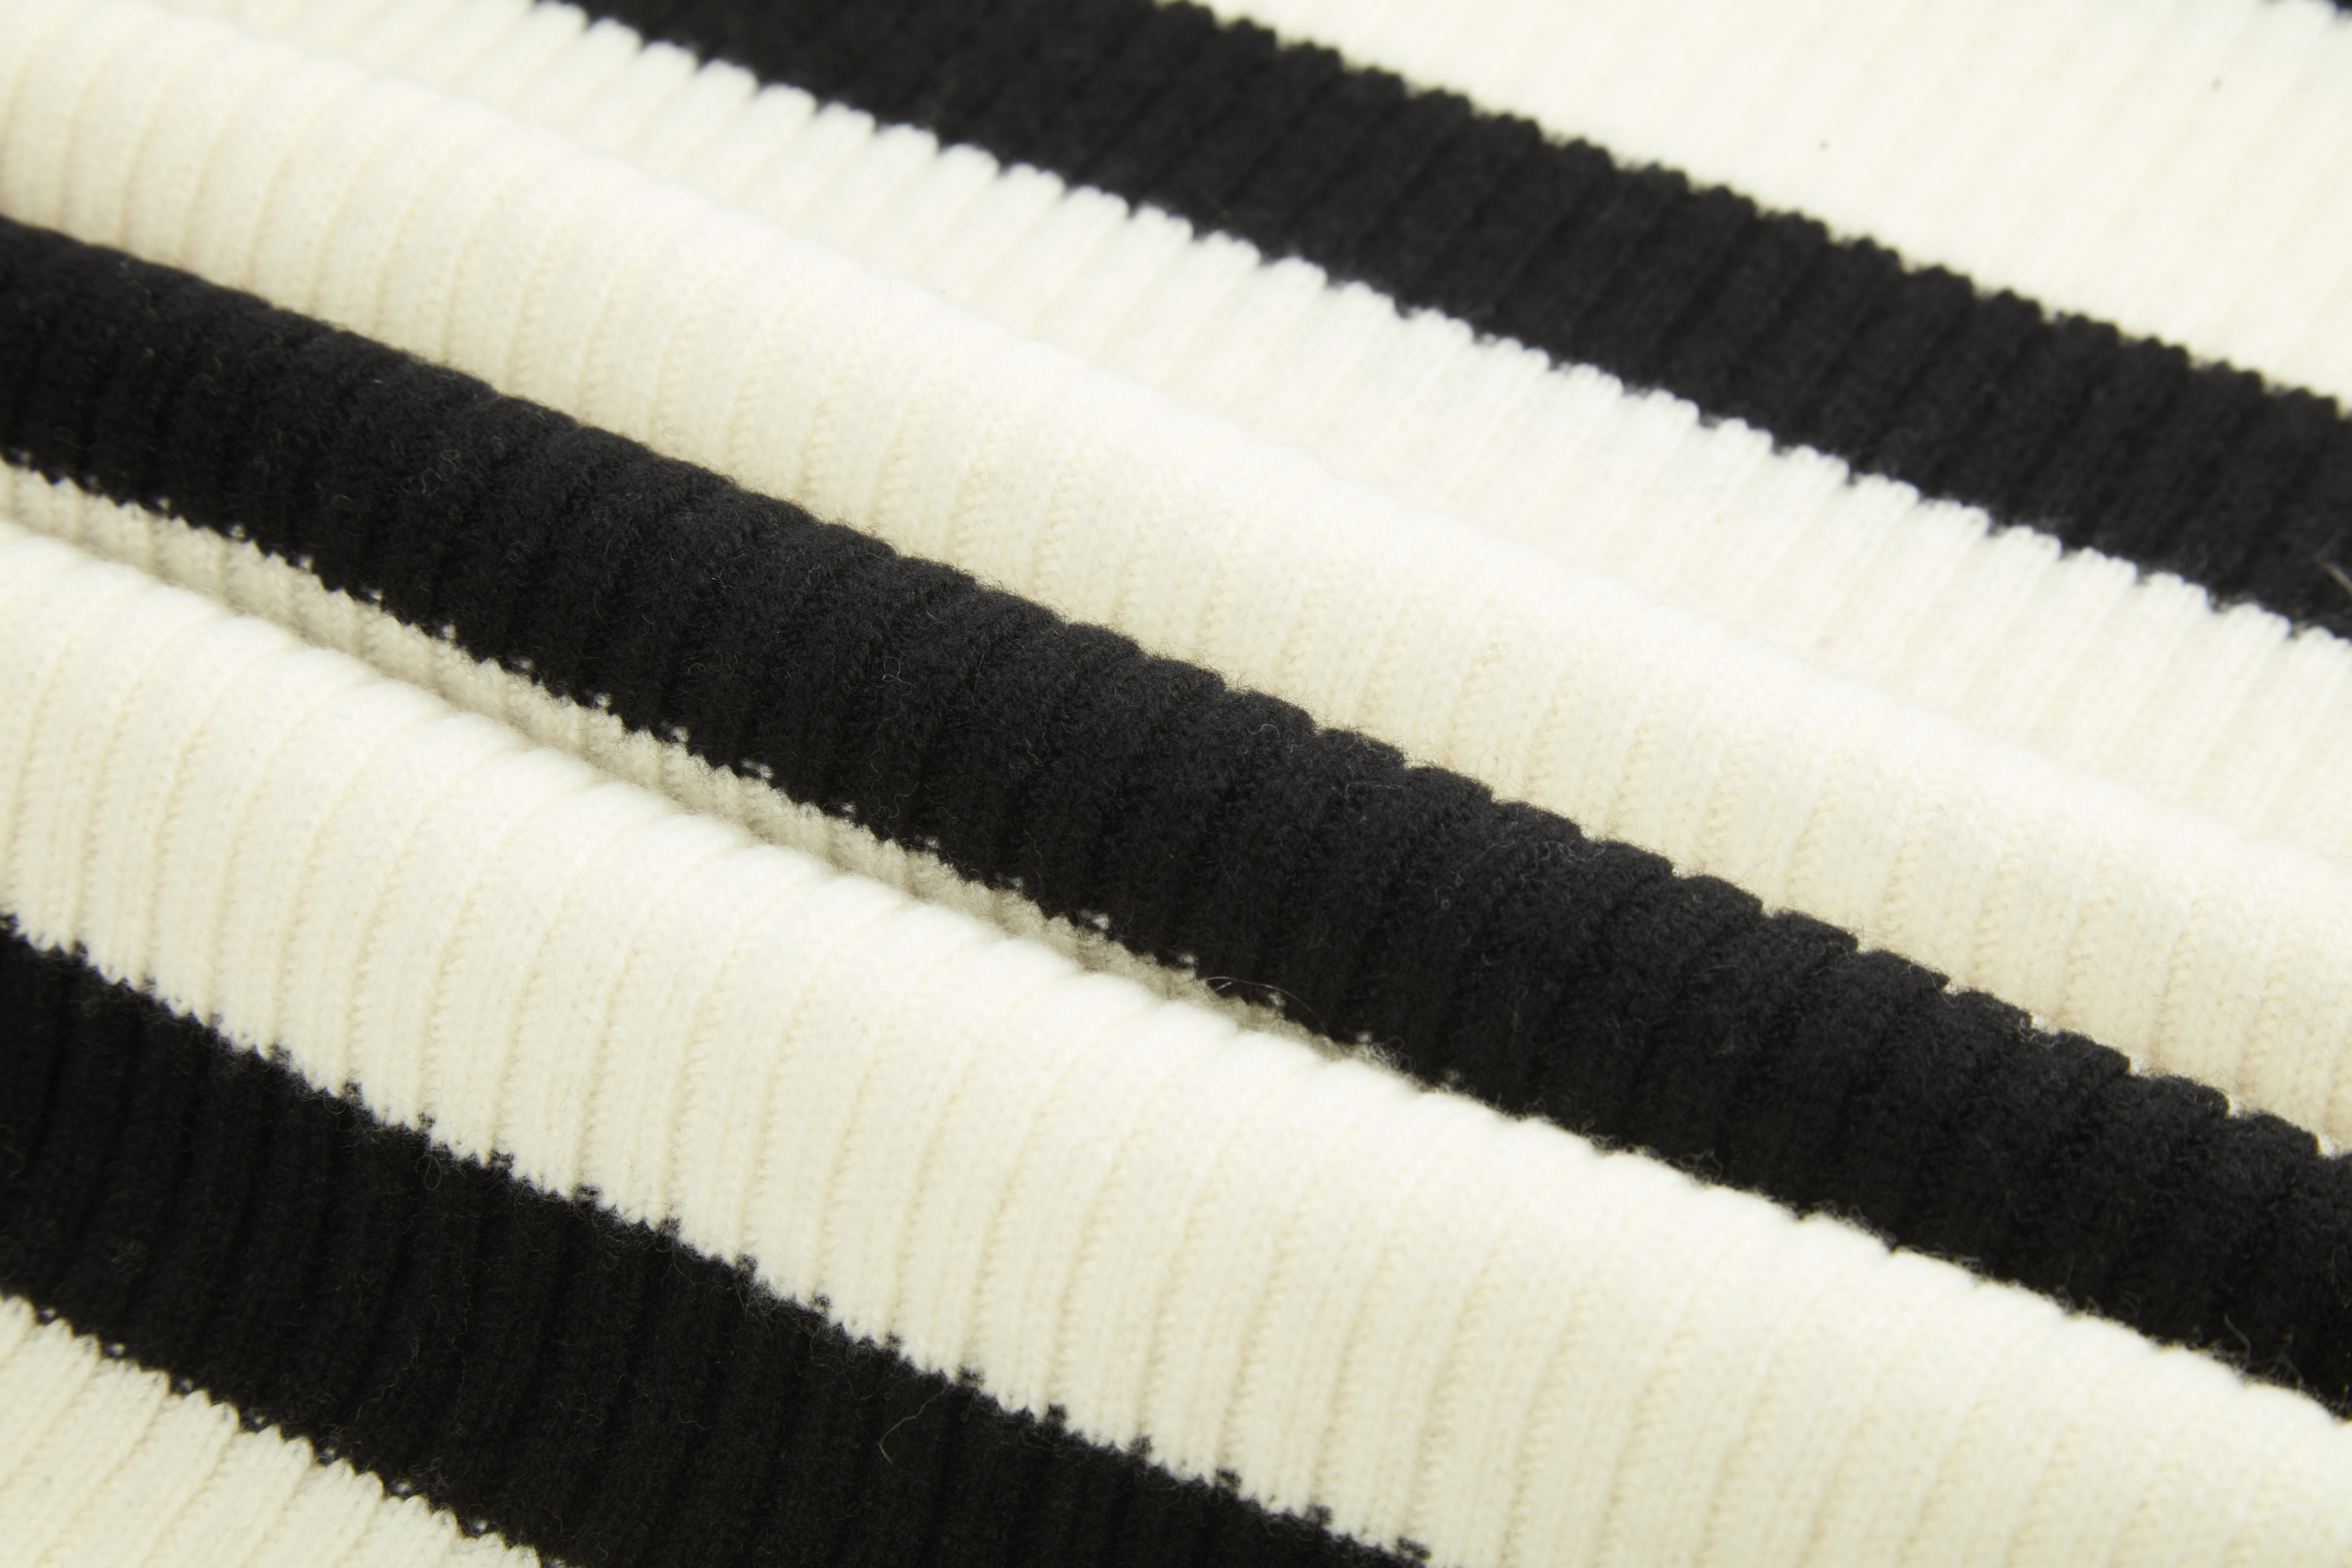 Wool And Cashmere blend Striped Scarf